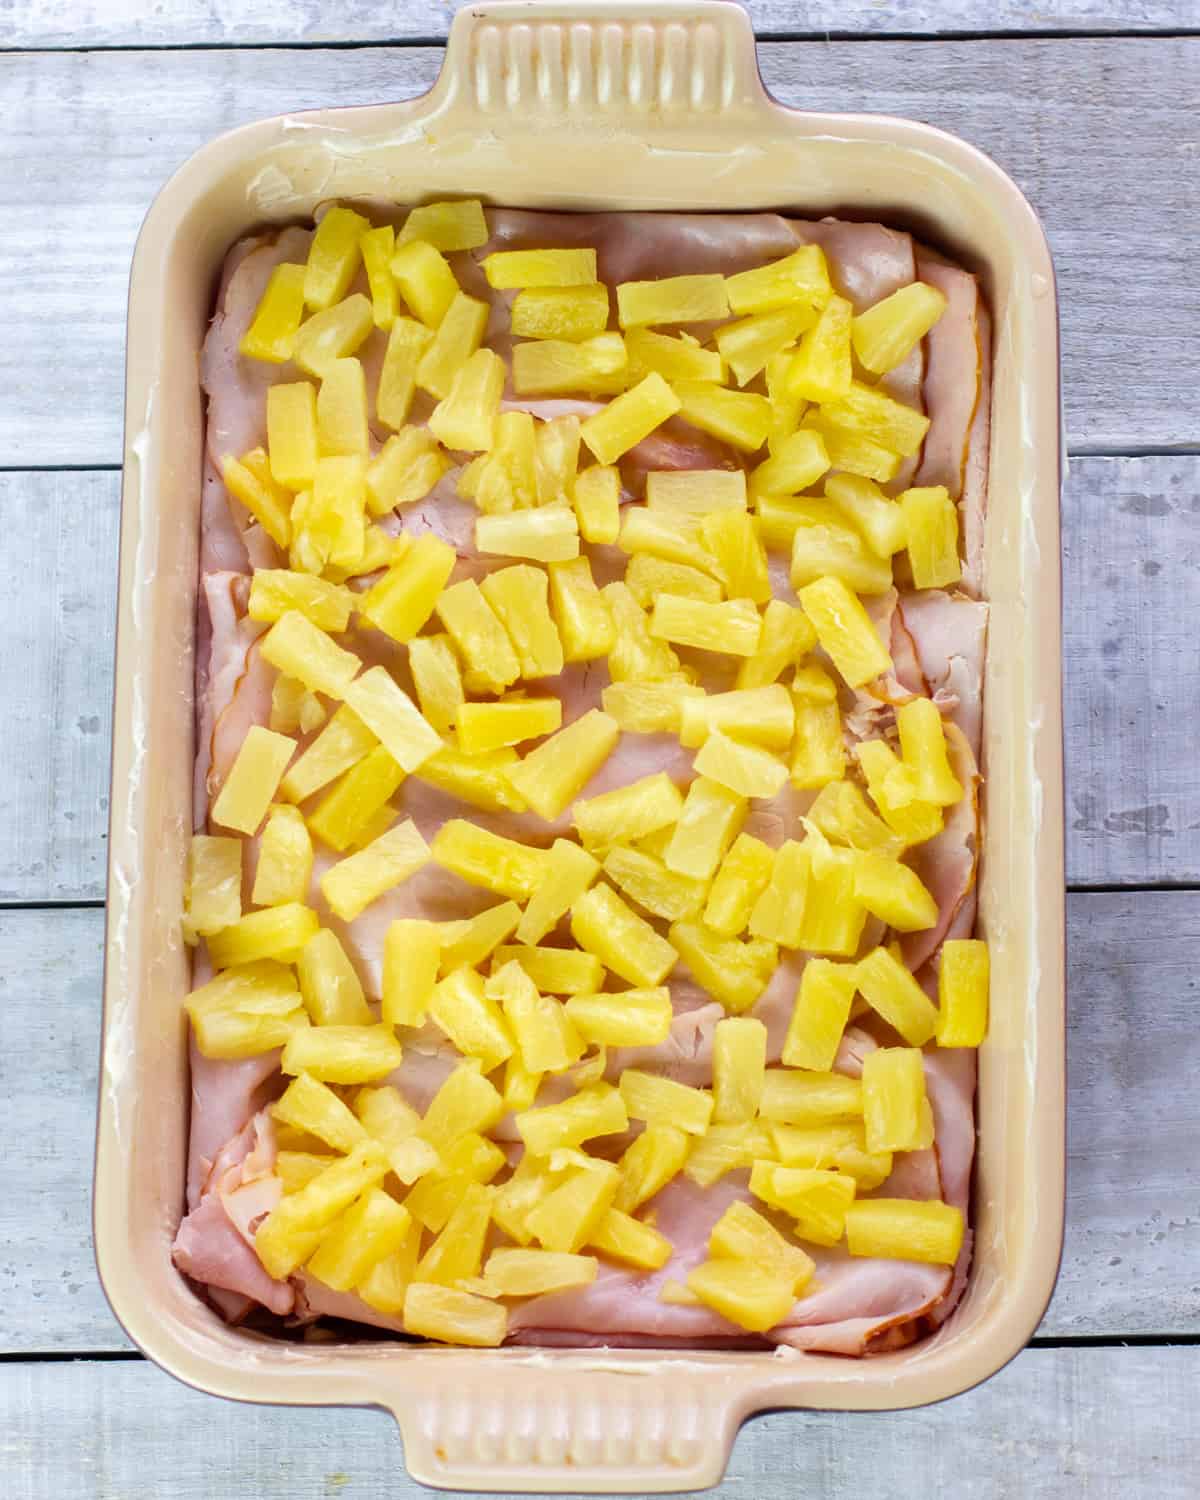 Pineapple pieces piled on sliced ham.